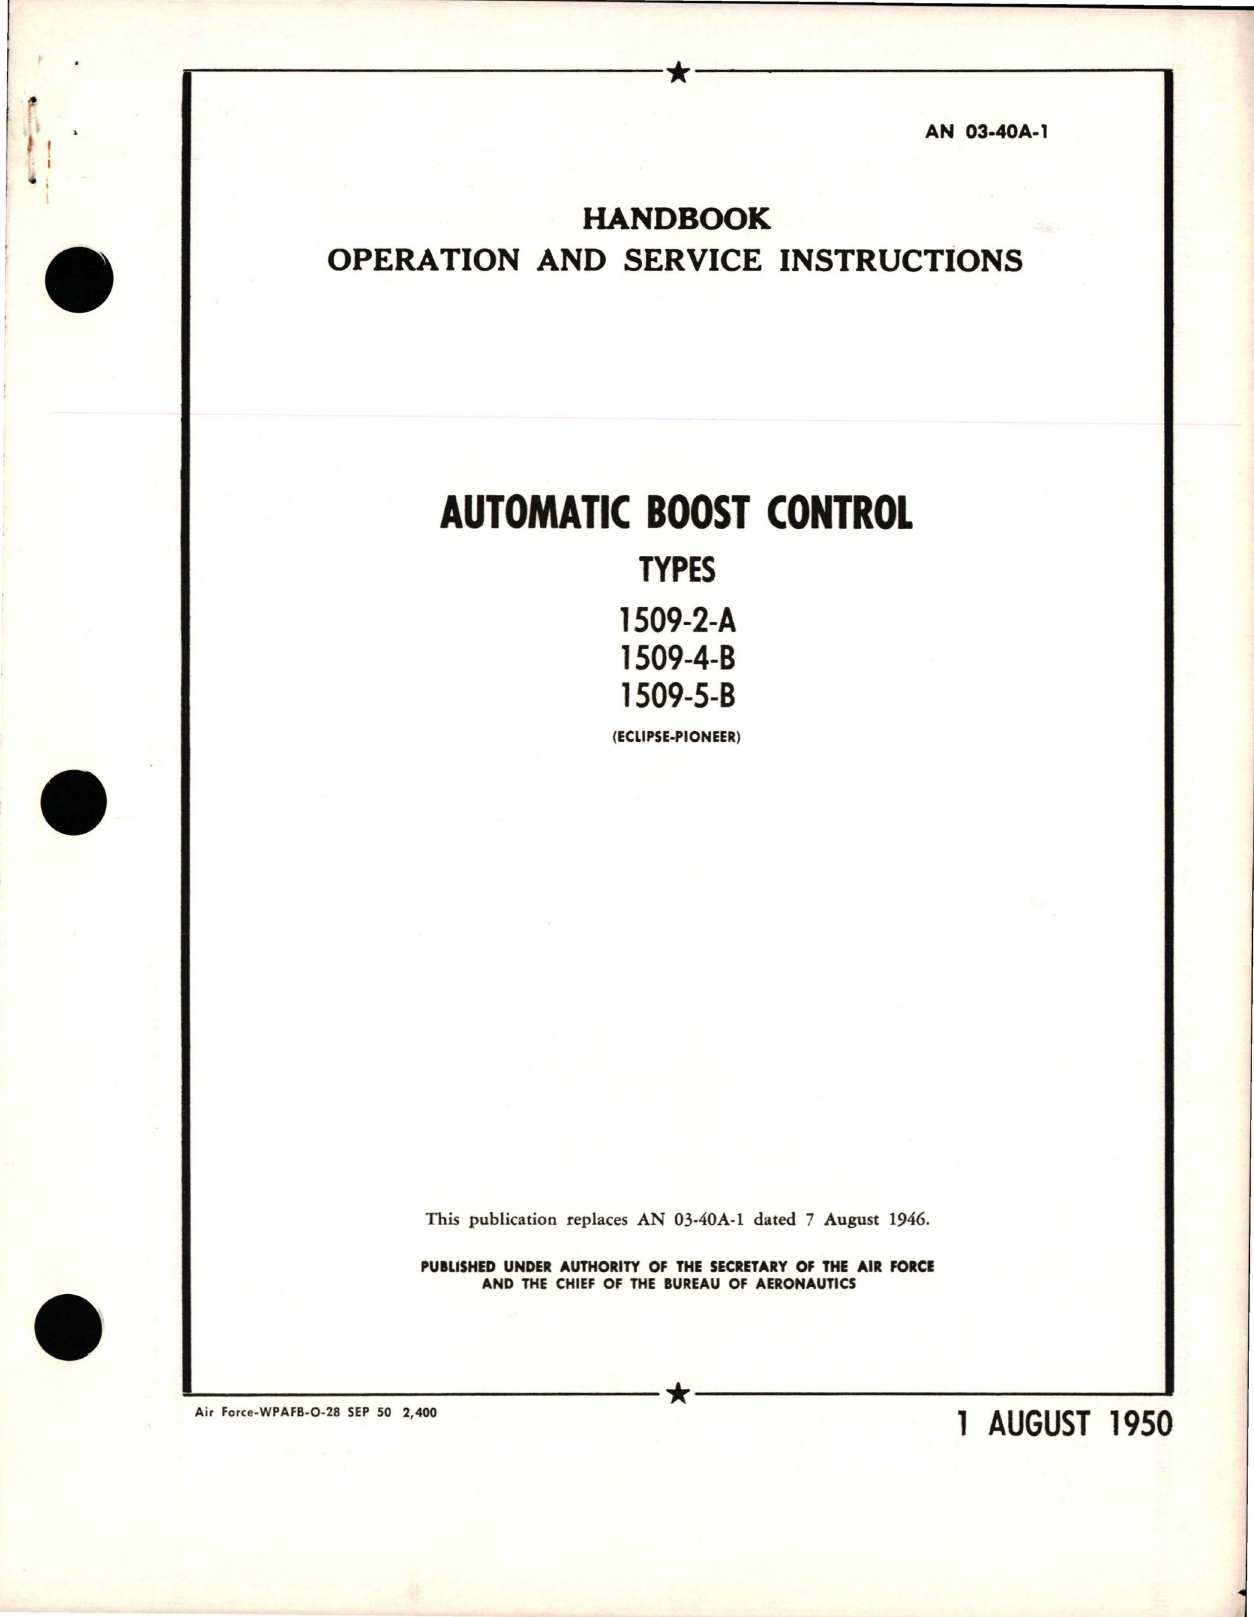 Sample page 1 from AirCorps Library document: Operation and Service Instructions for Automatic Boost Control - Types 1509-2-A, 1509-4-B, and 1509-5-B 